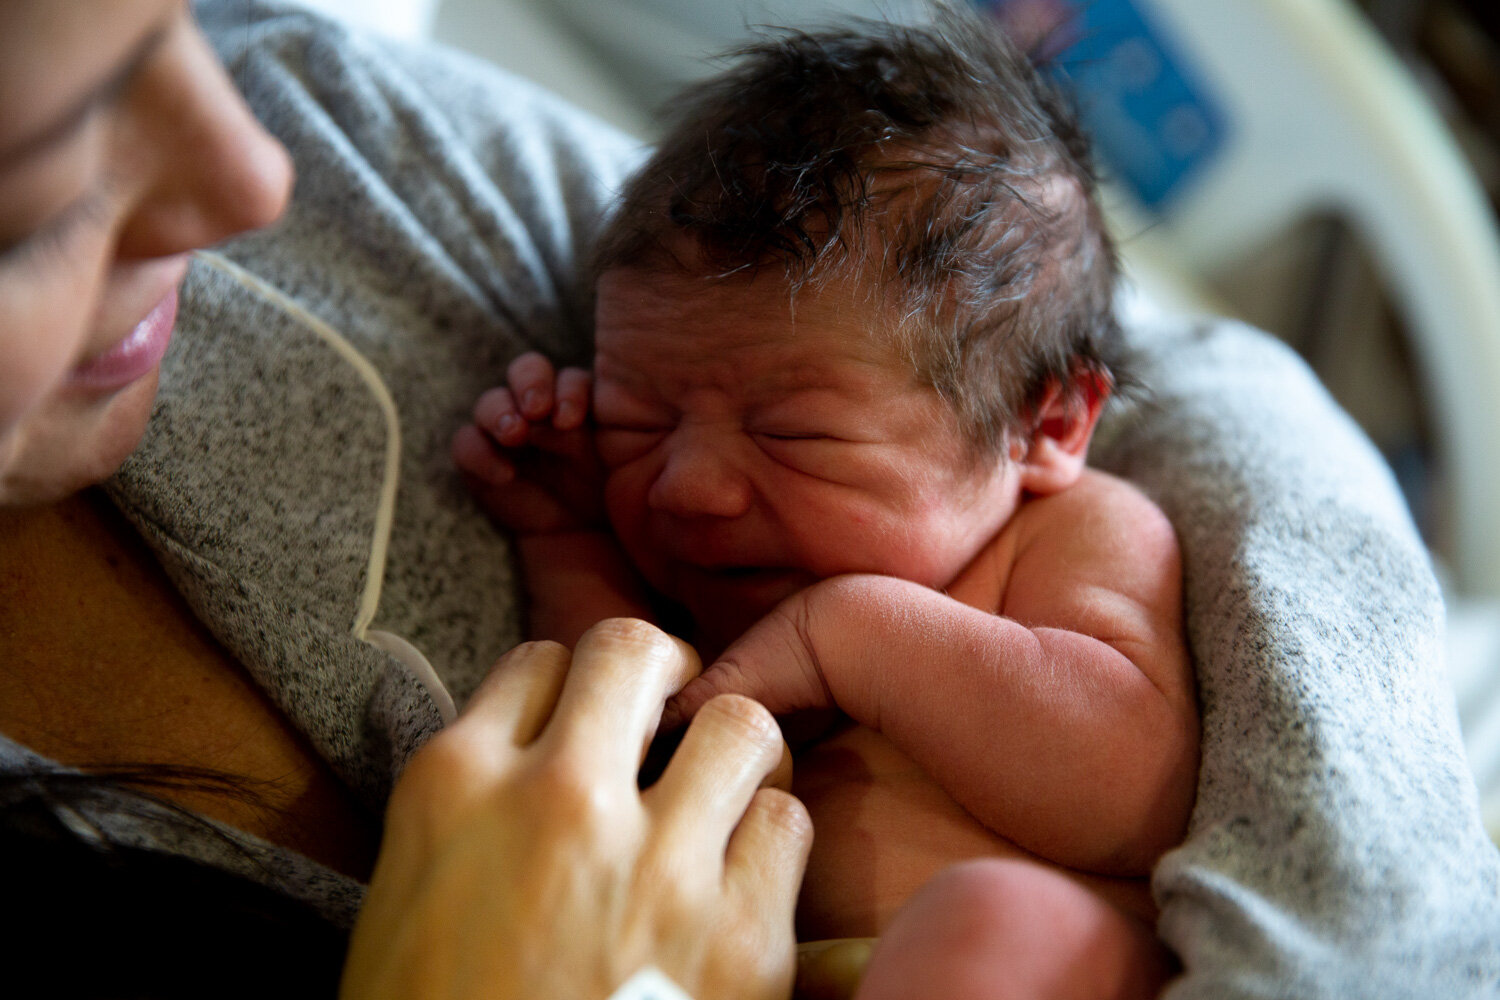 Newborn baby in mom's arms just after being born